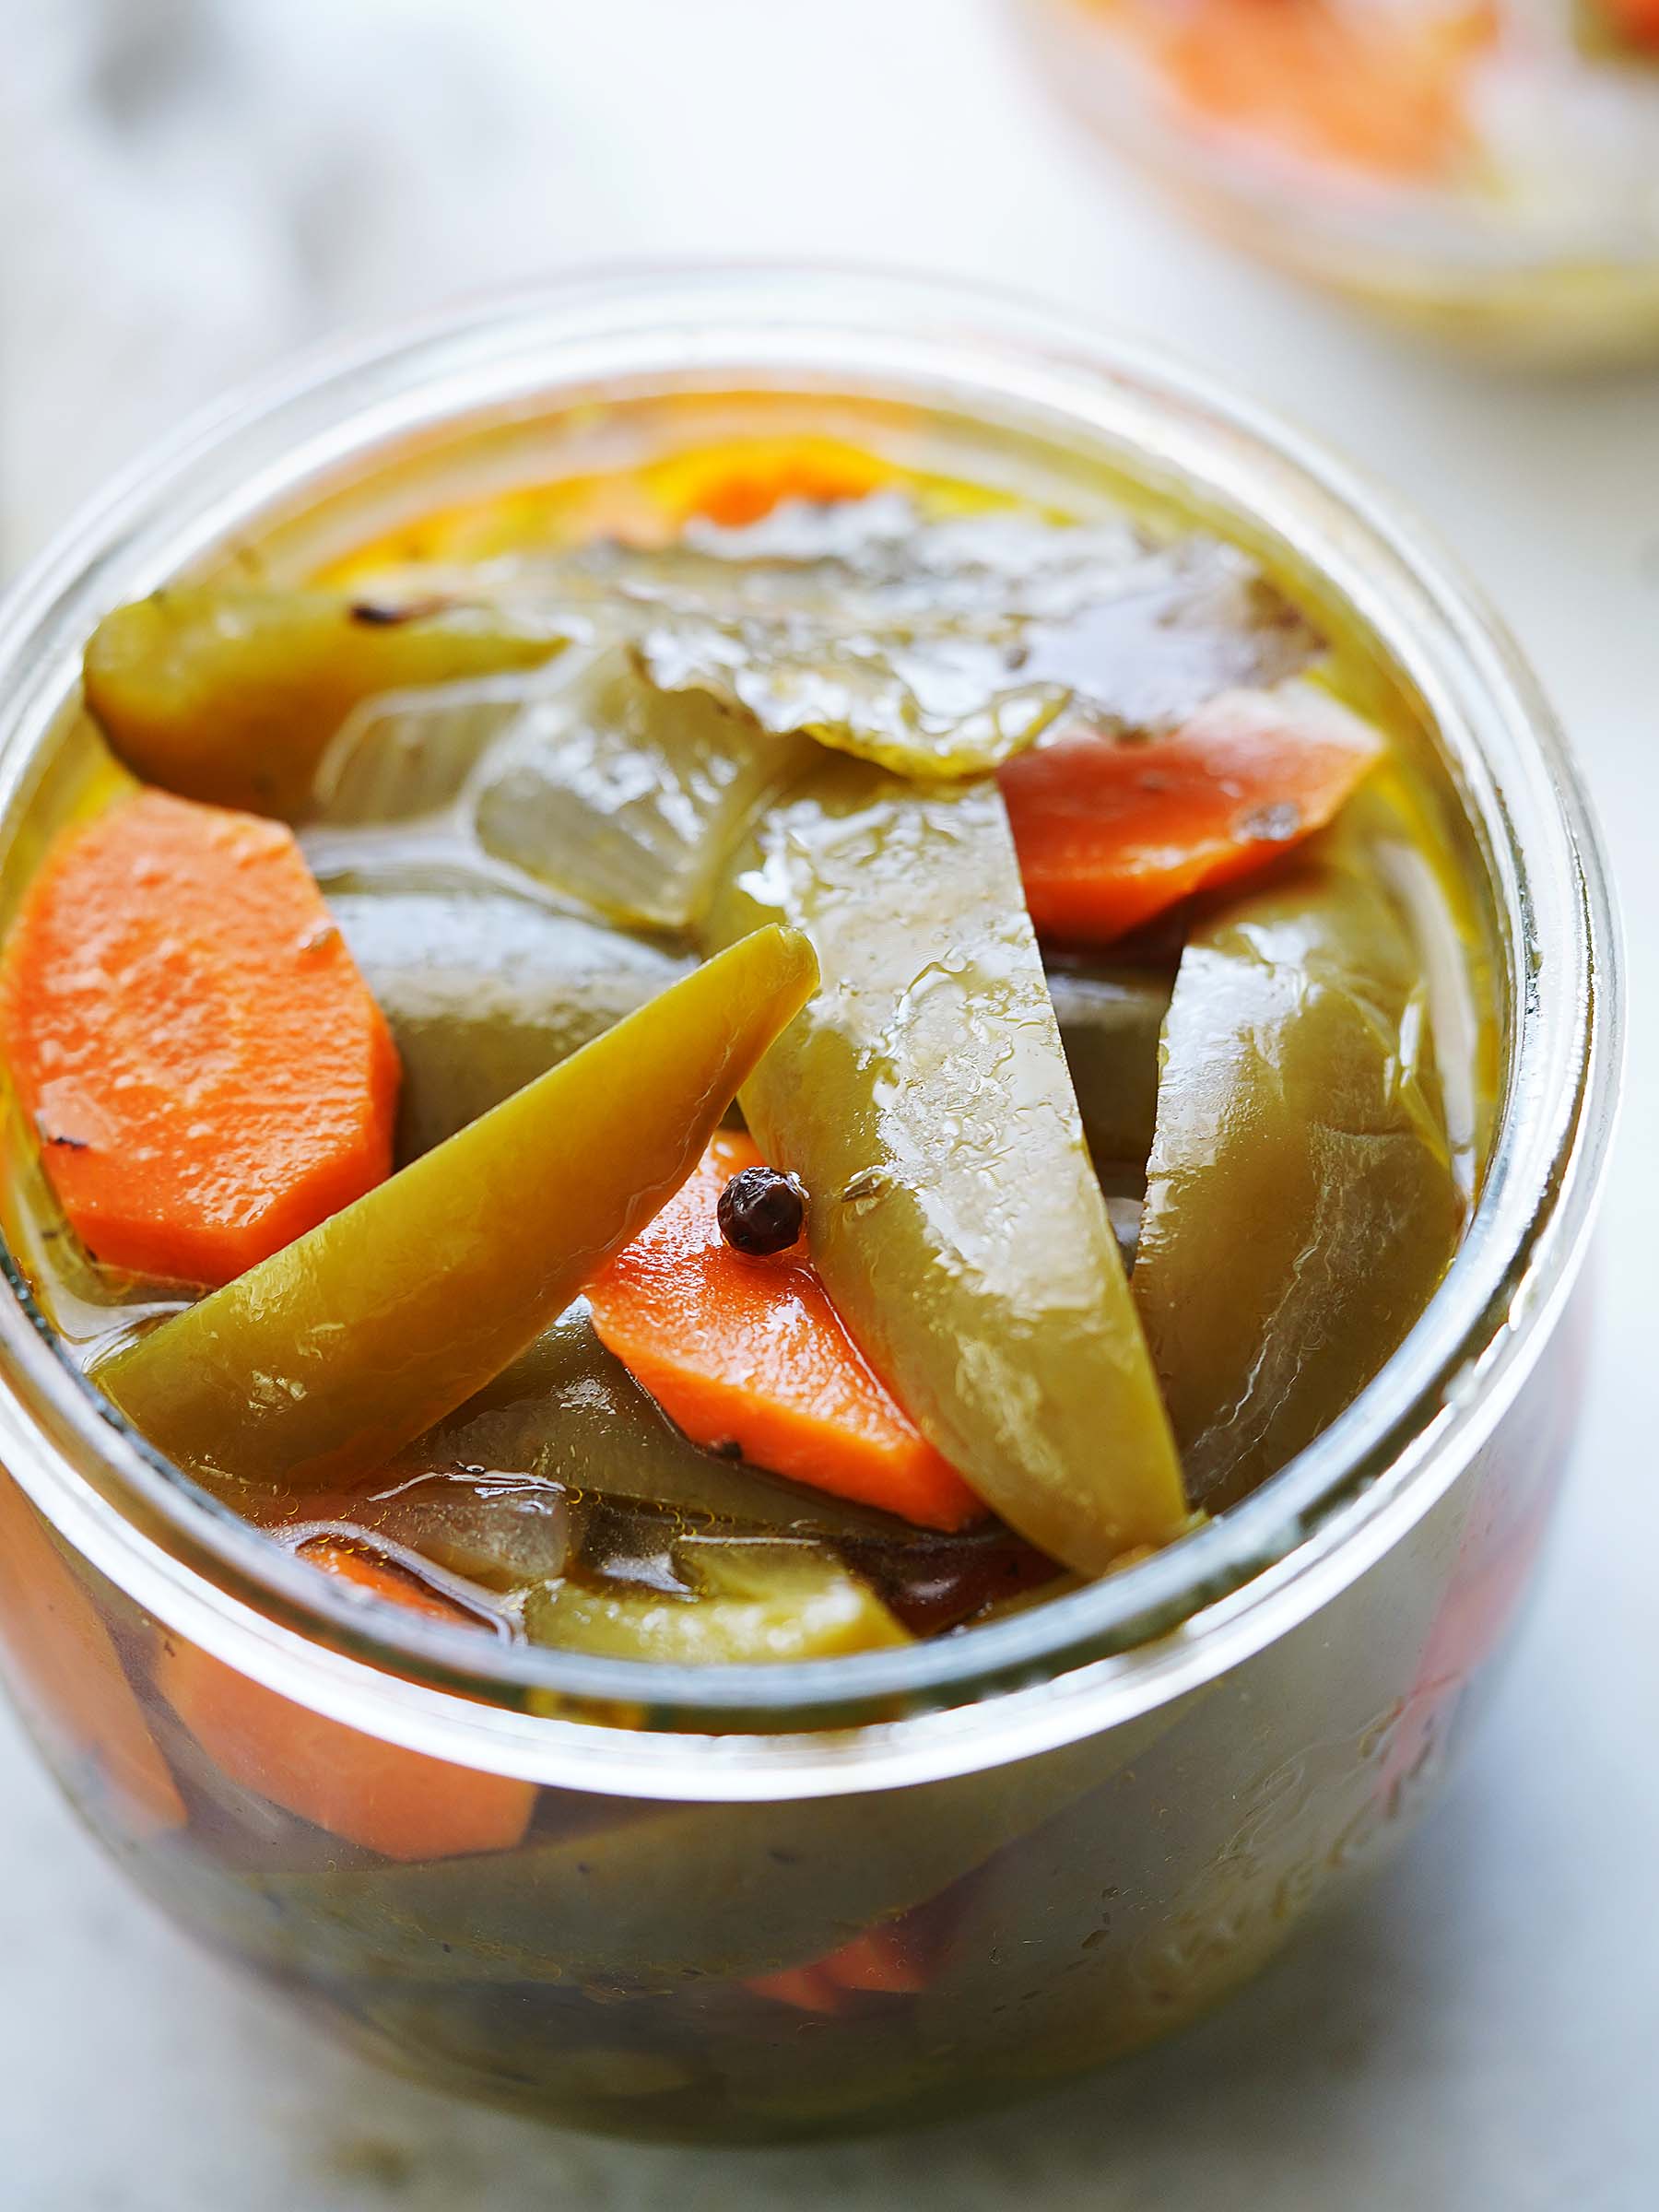 Pickled jalapeños and carrots in a small jar.